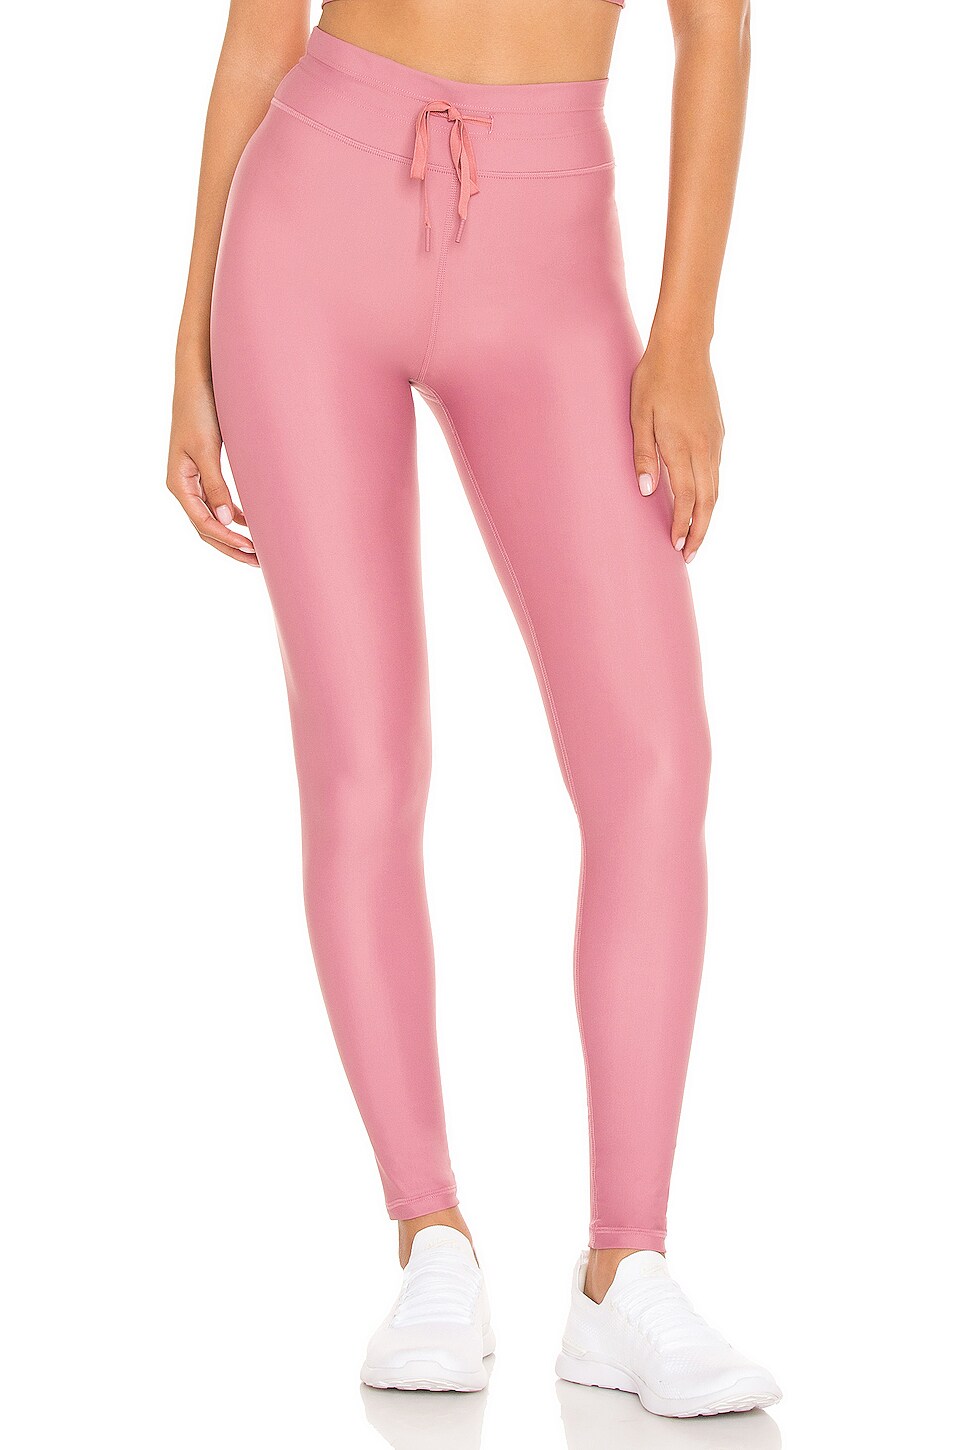 THE UPSIDE Solid Yoga Pant Pink